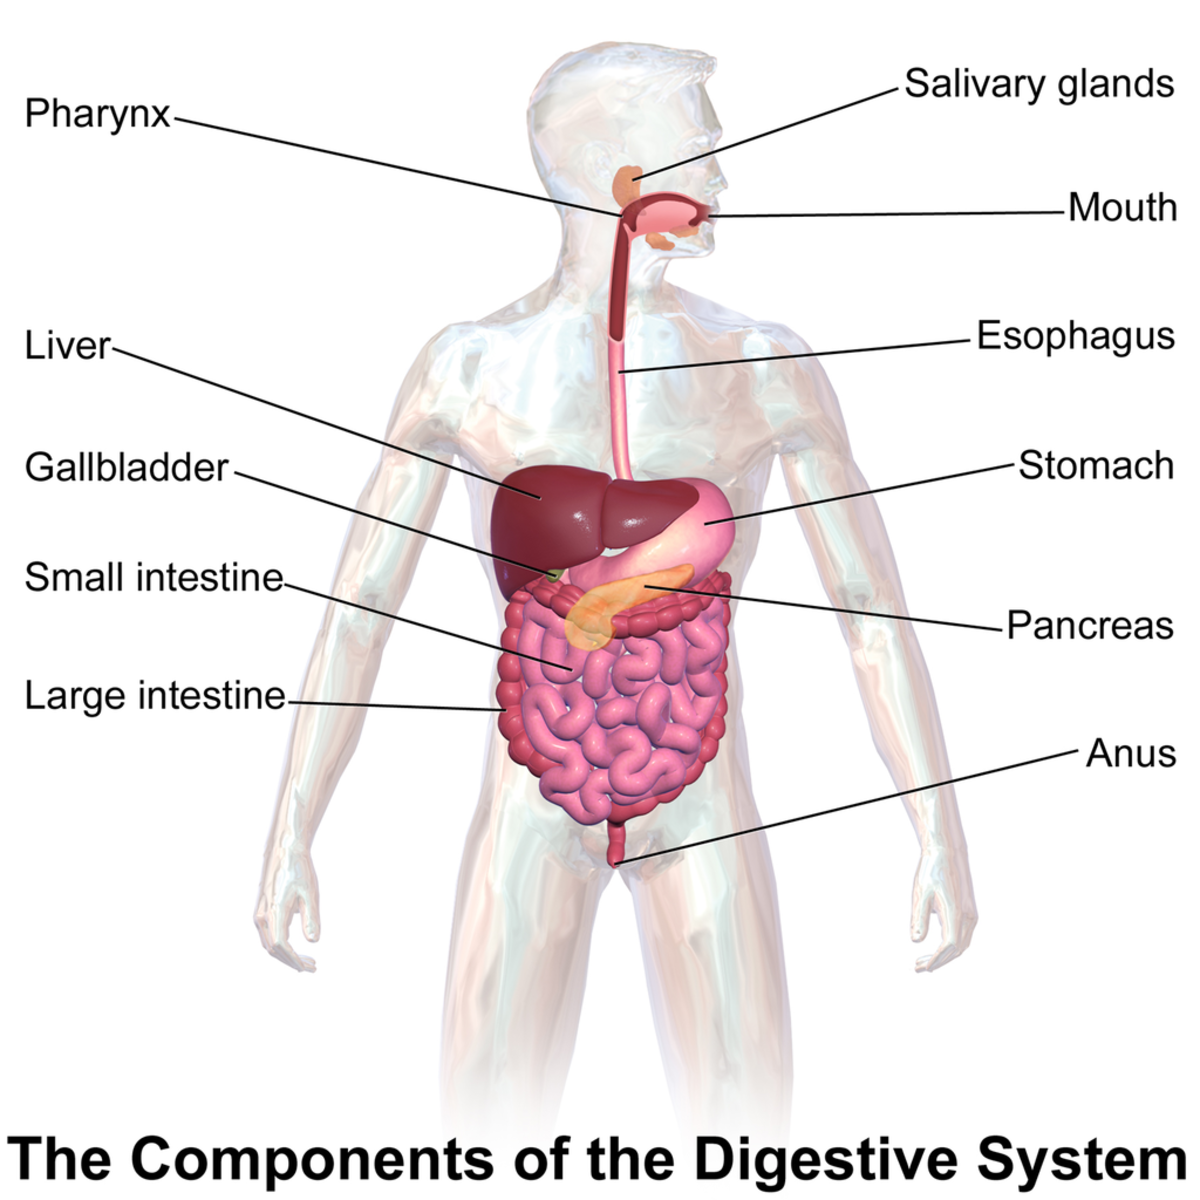 The digestive tract forms a continuous tube from the mouth to the anus. The liver and the gallbladder ducts help digestion and can be involved in jaundice.